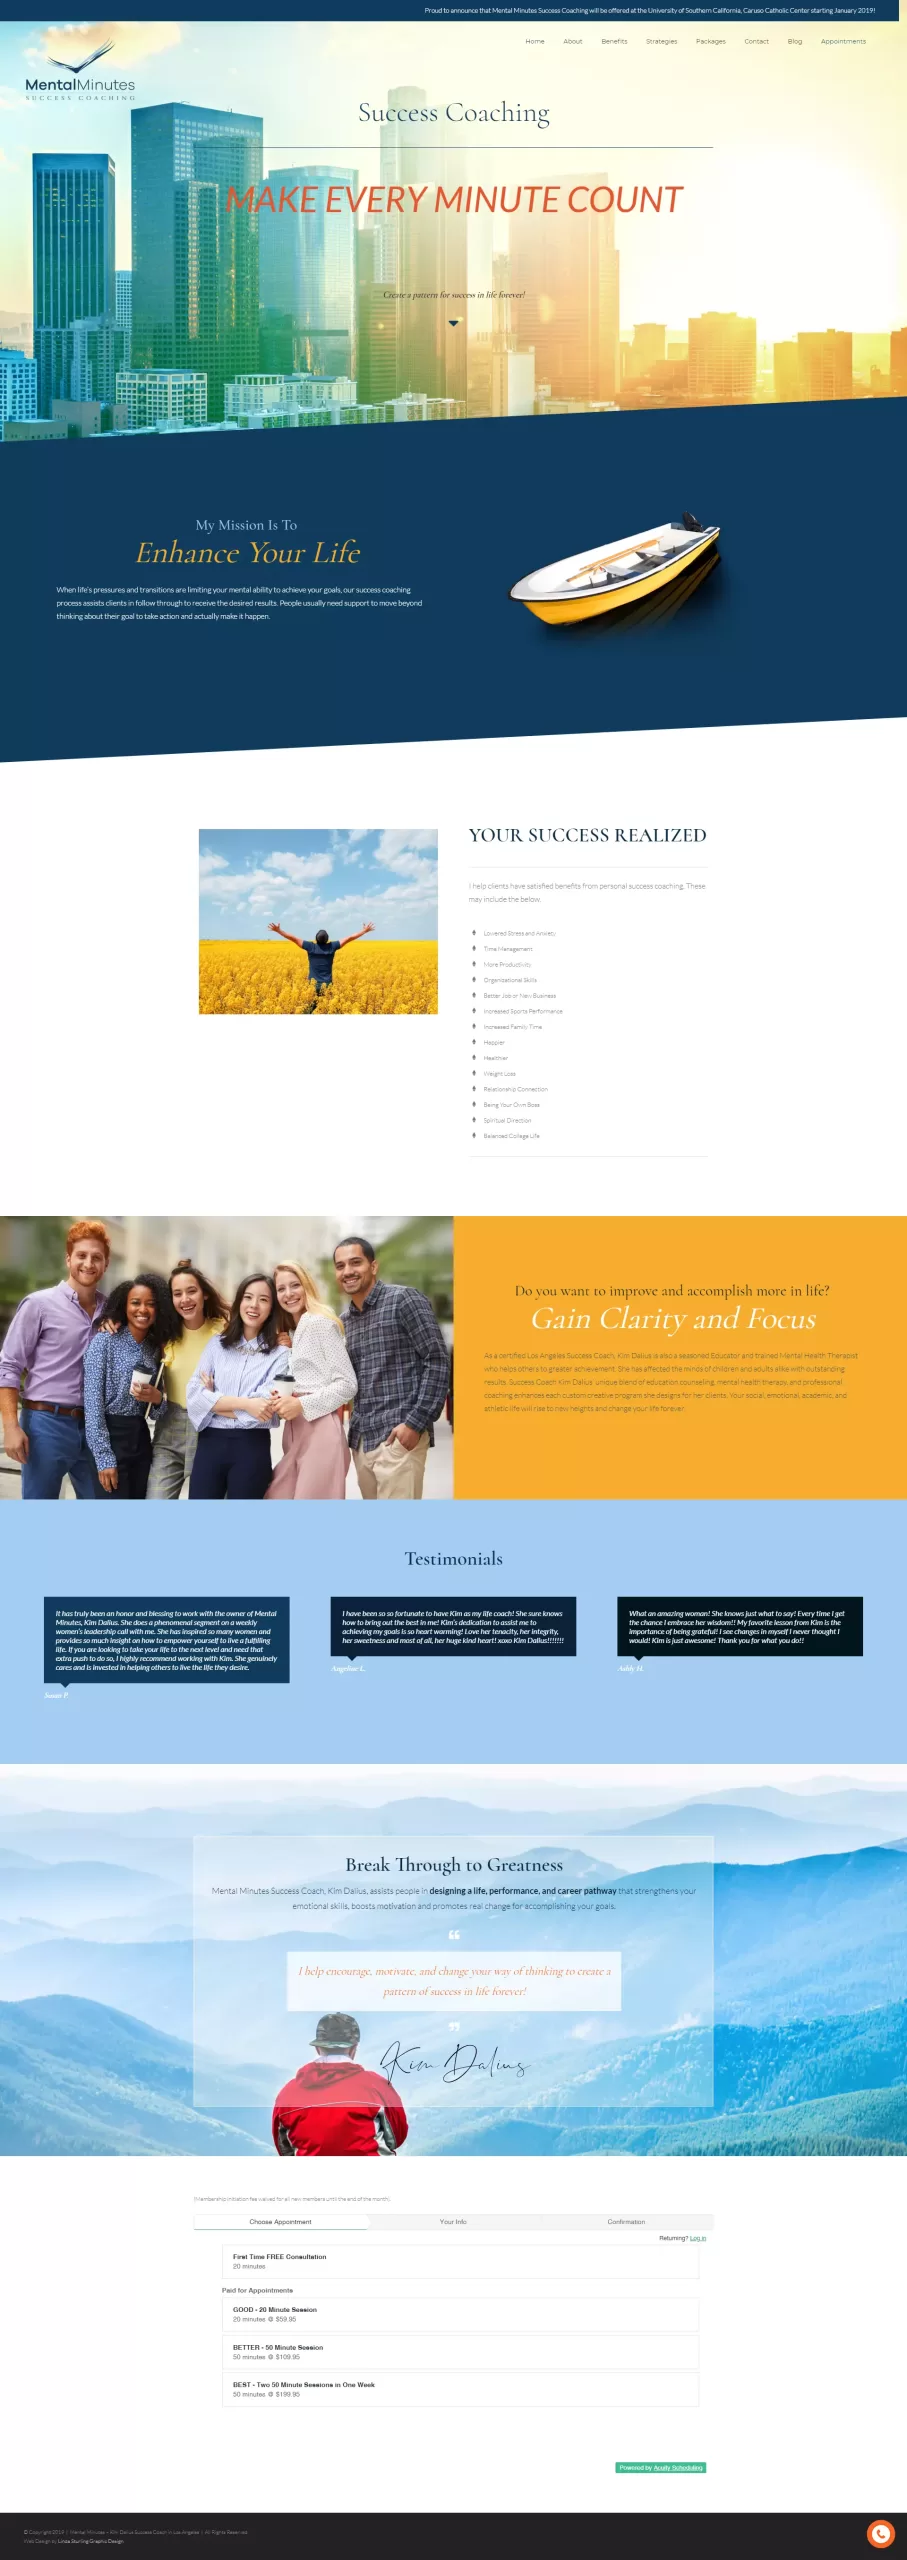 Web Design of Home Page for Mental Minutes